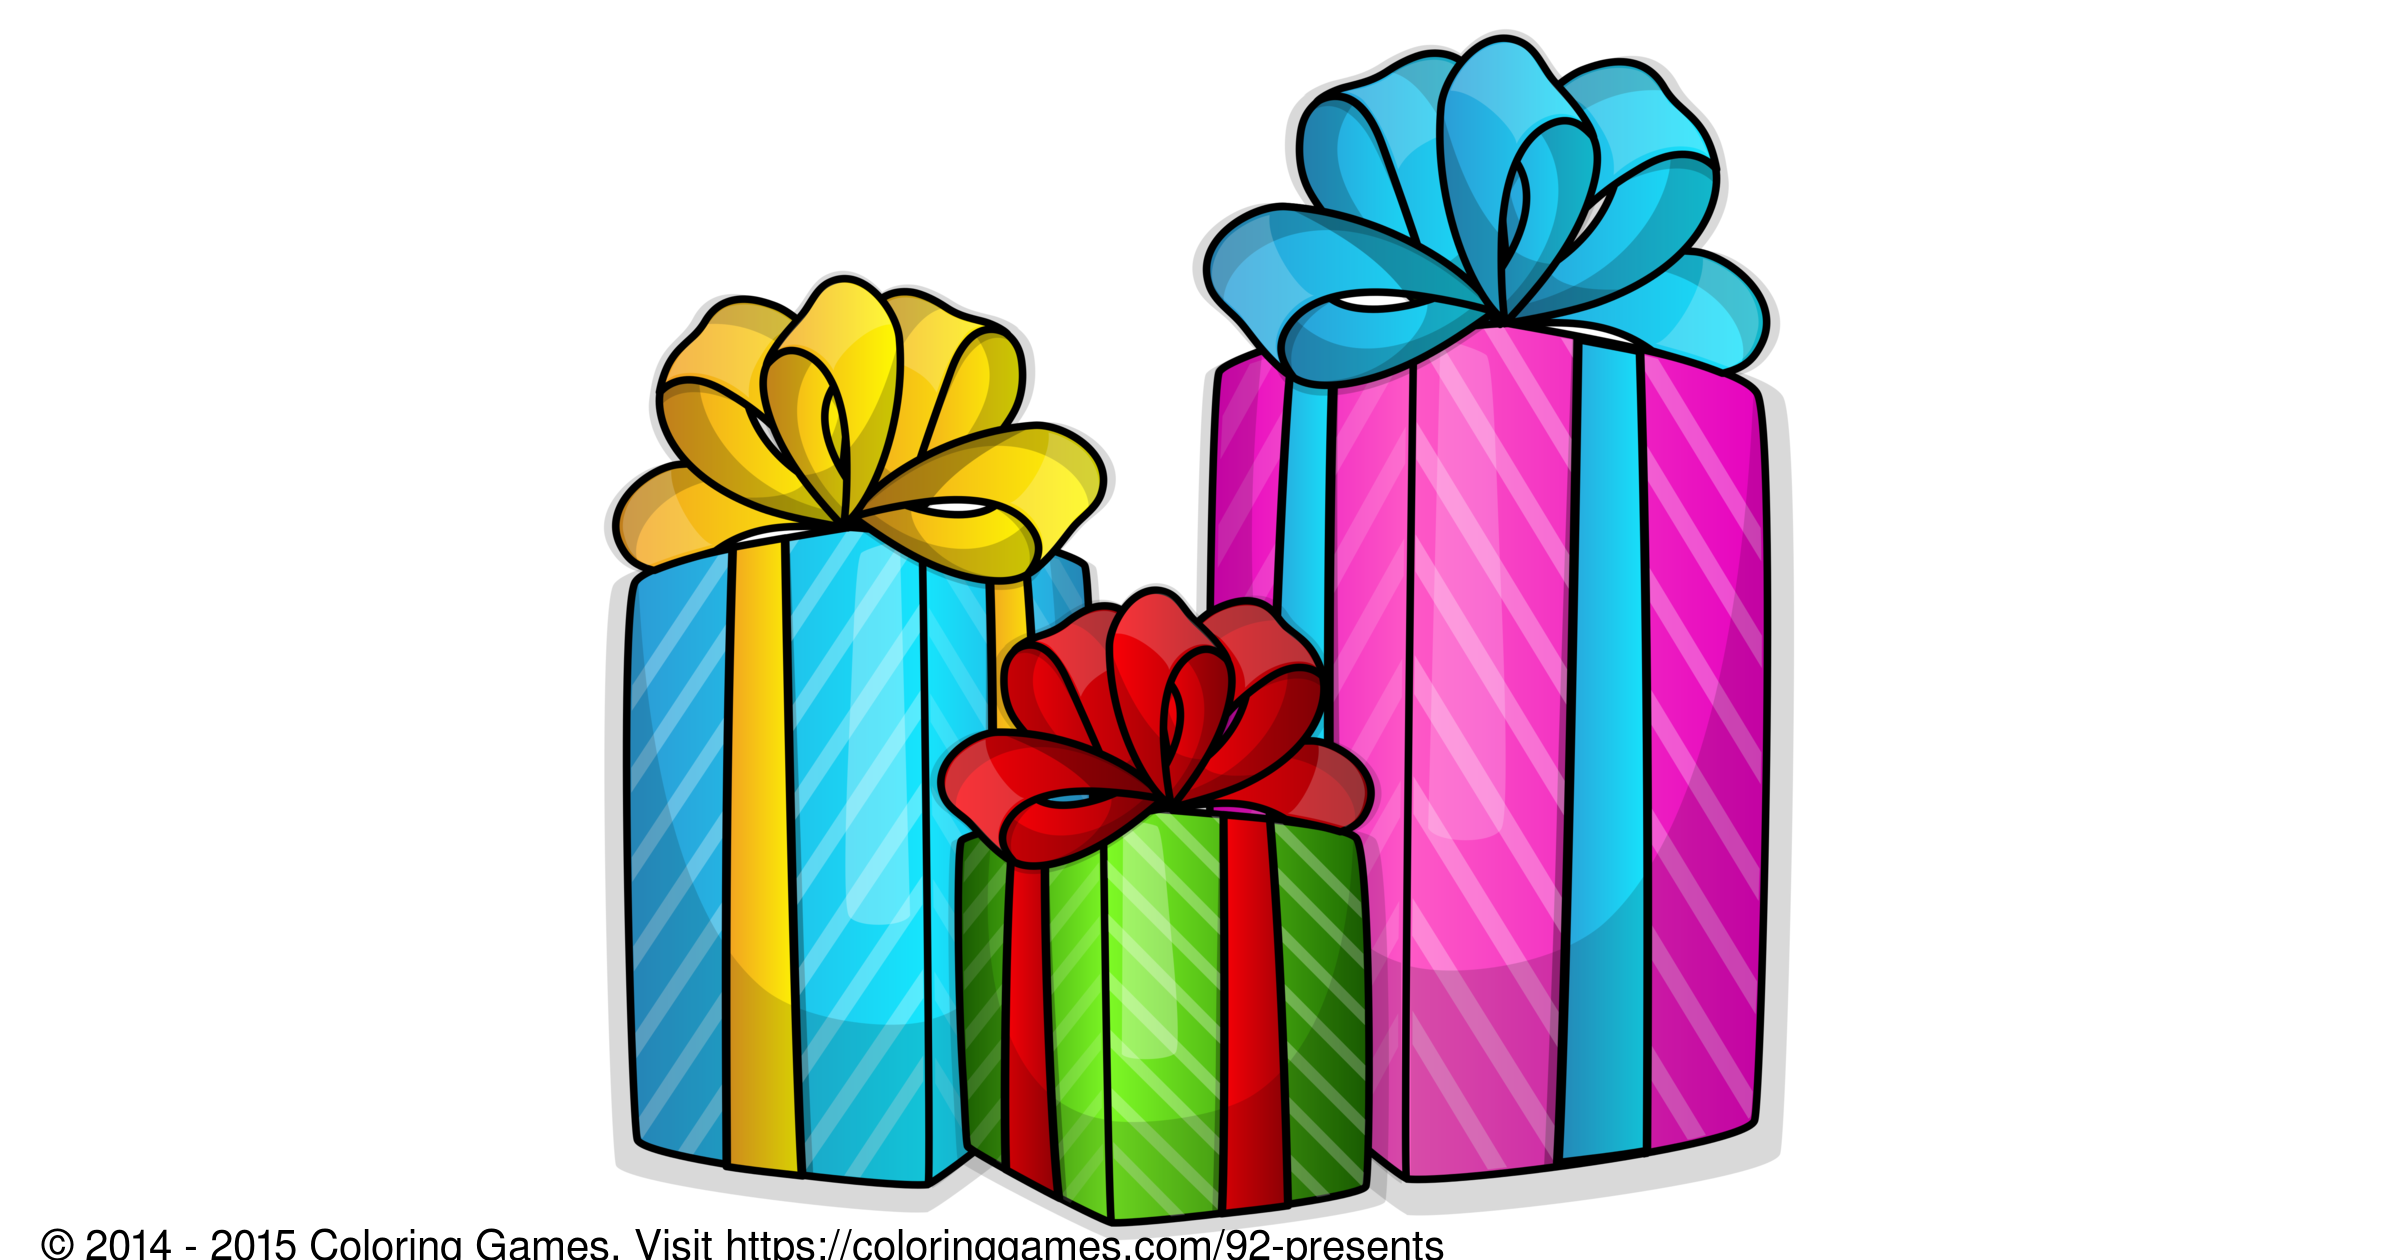 Presents - Coloring Games and Coloring Pages